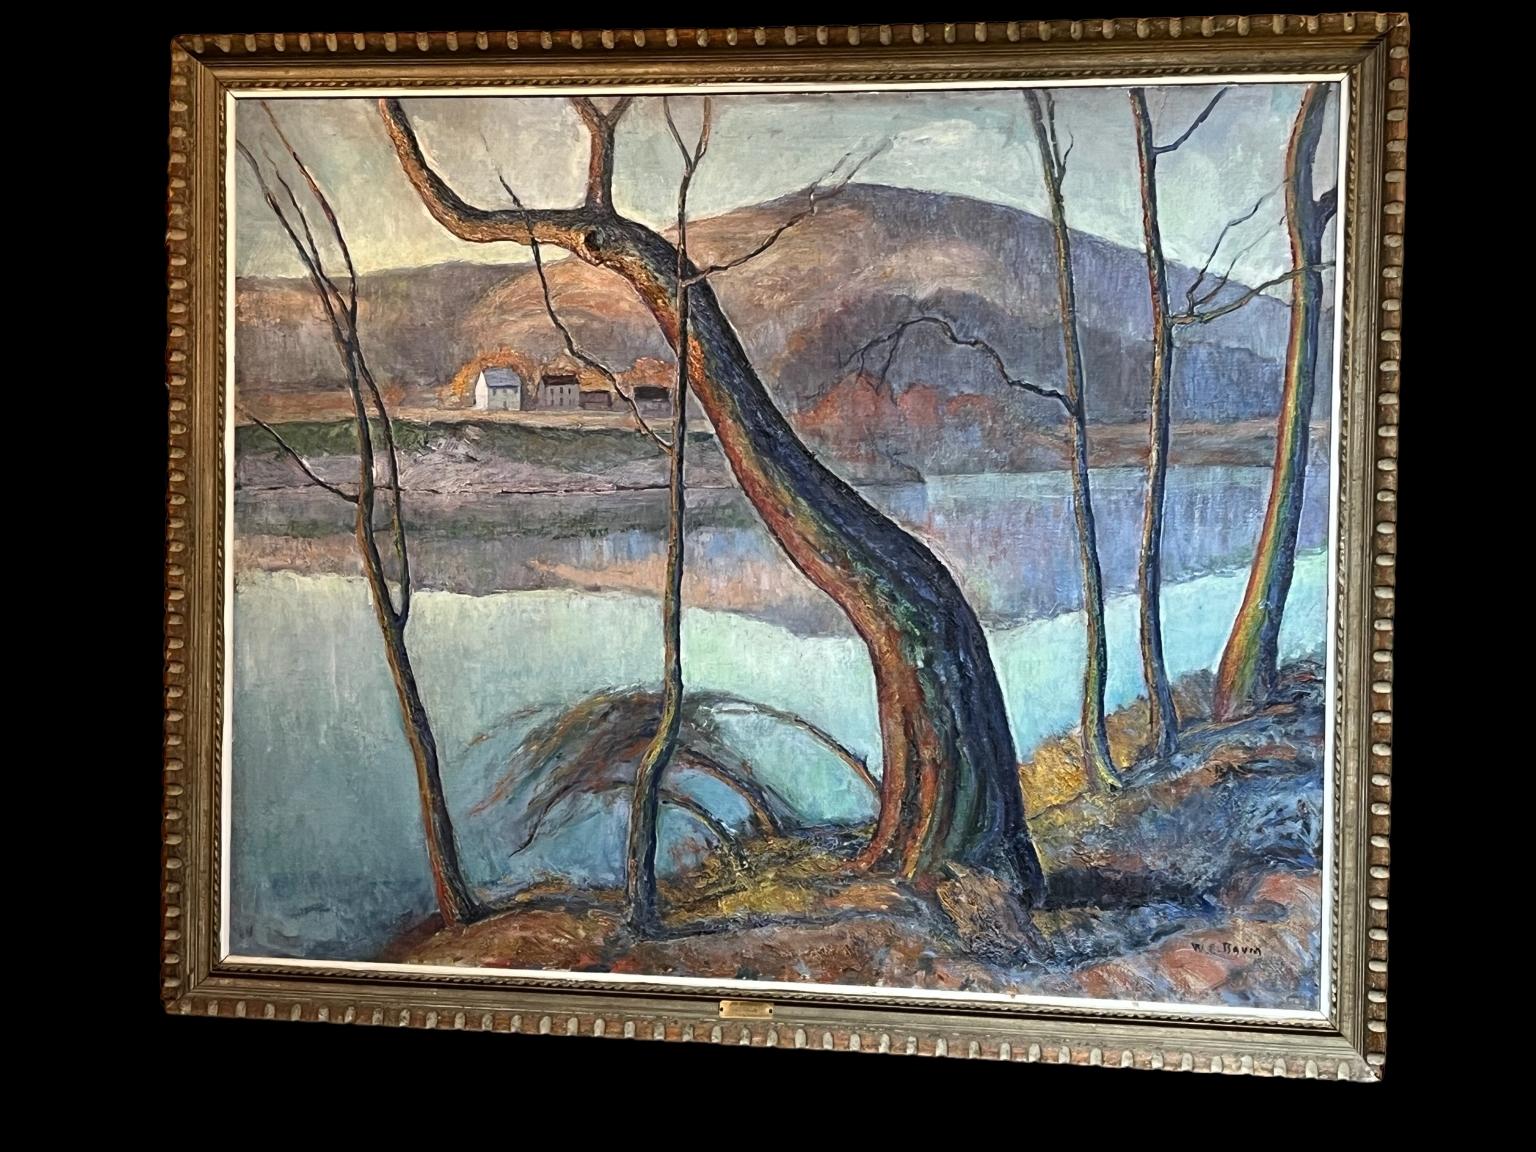 20th Century Walter Emerson Baum Painting Titled The Delaware Circa 1930’s-40 For Sale